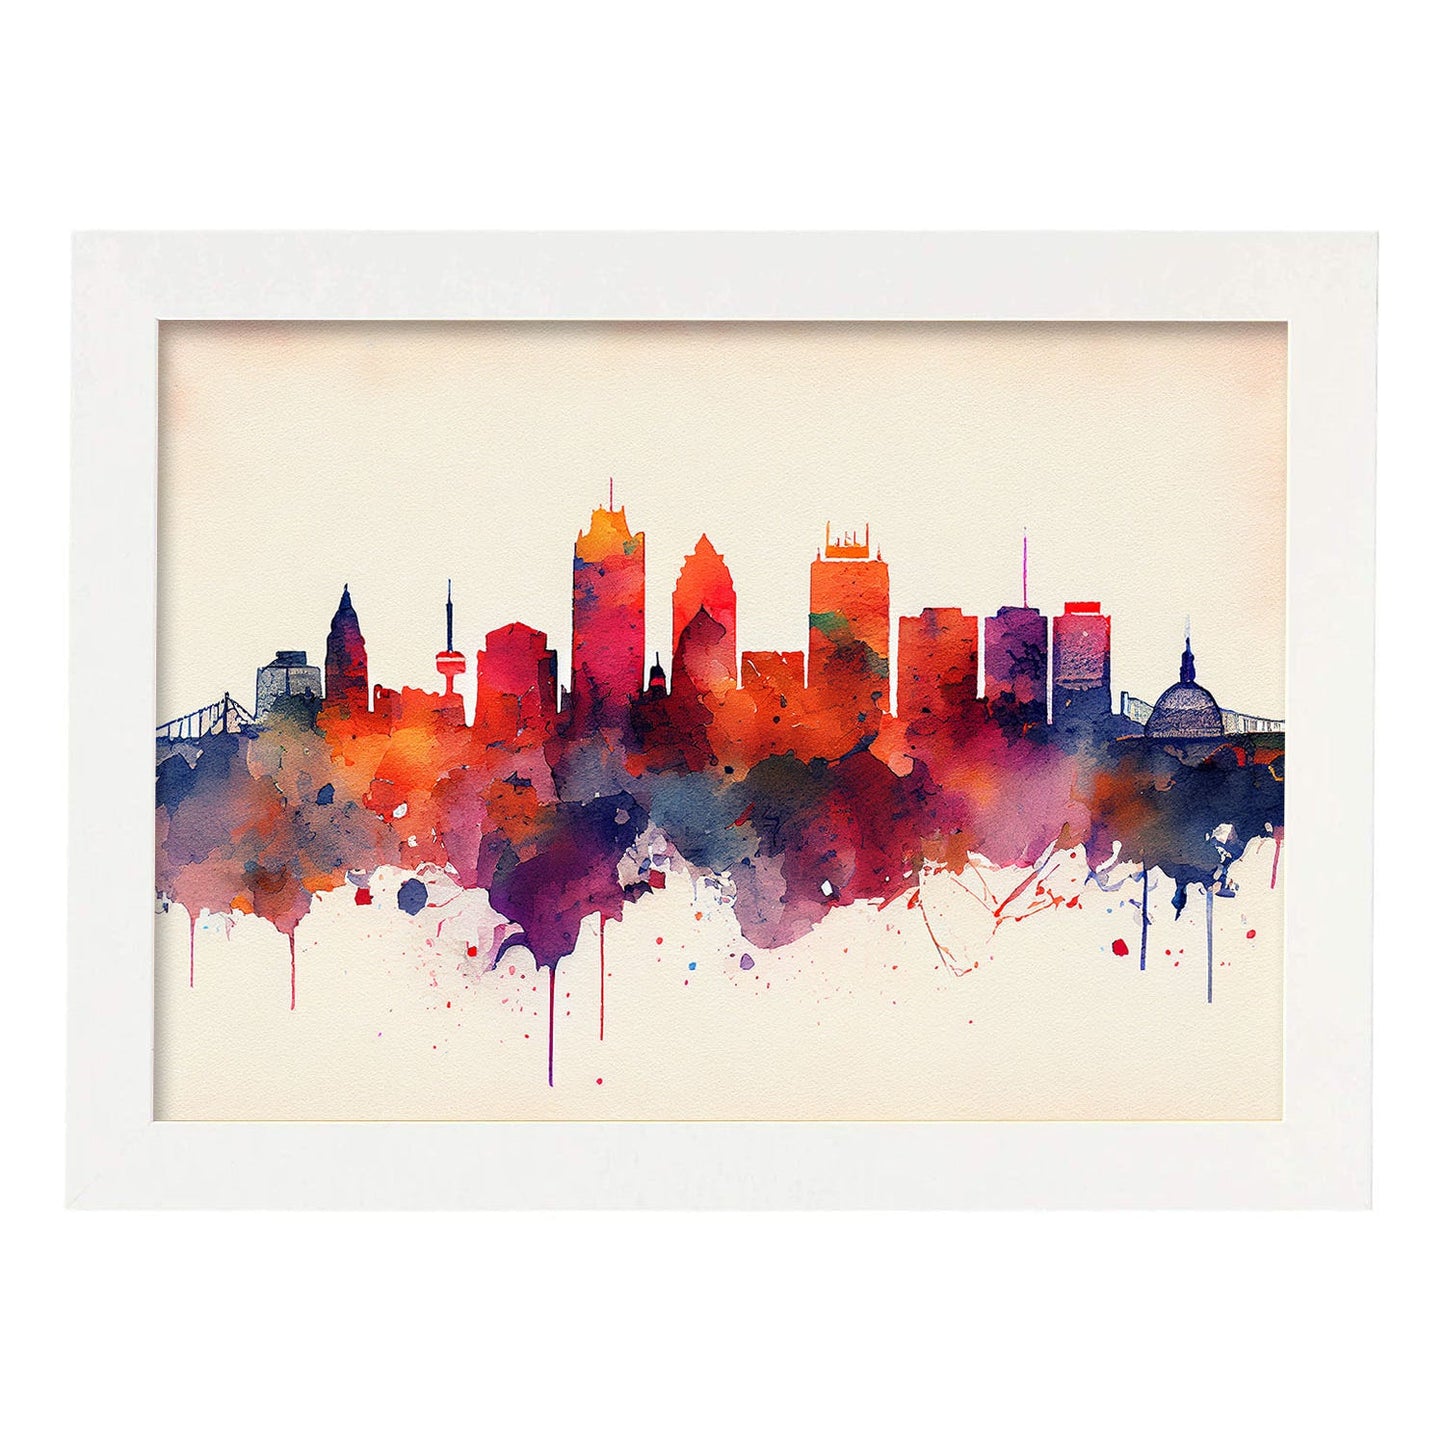 Nacnic watercolor of a skyline of the city of Boston_3. Aesthetic Wall Art Prints for Bedroom or Living Room Design.-Artwork-Nacnic-A4-Marco Blanco-Nacnic Estudio SL